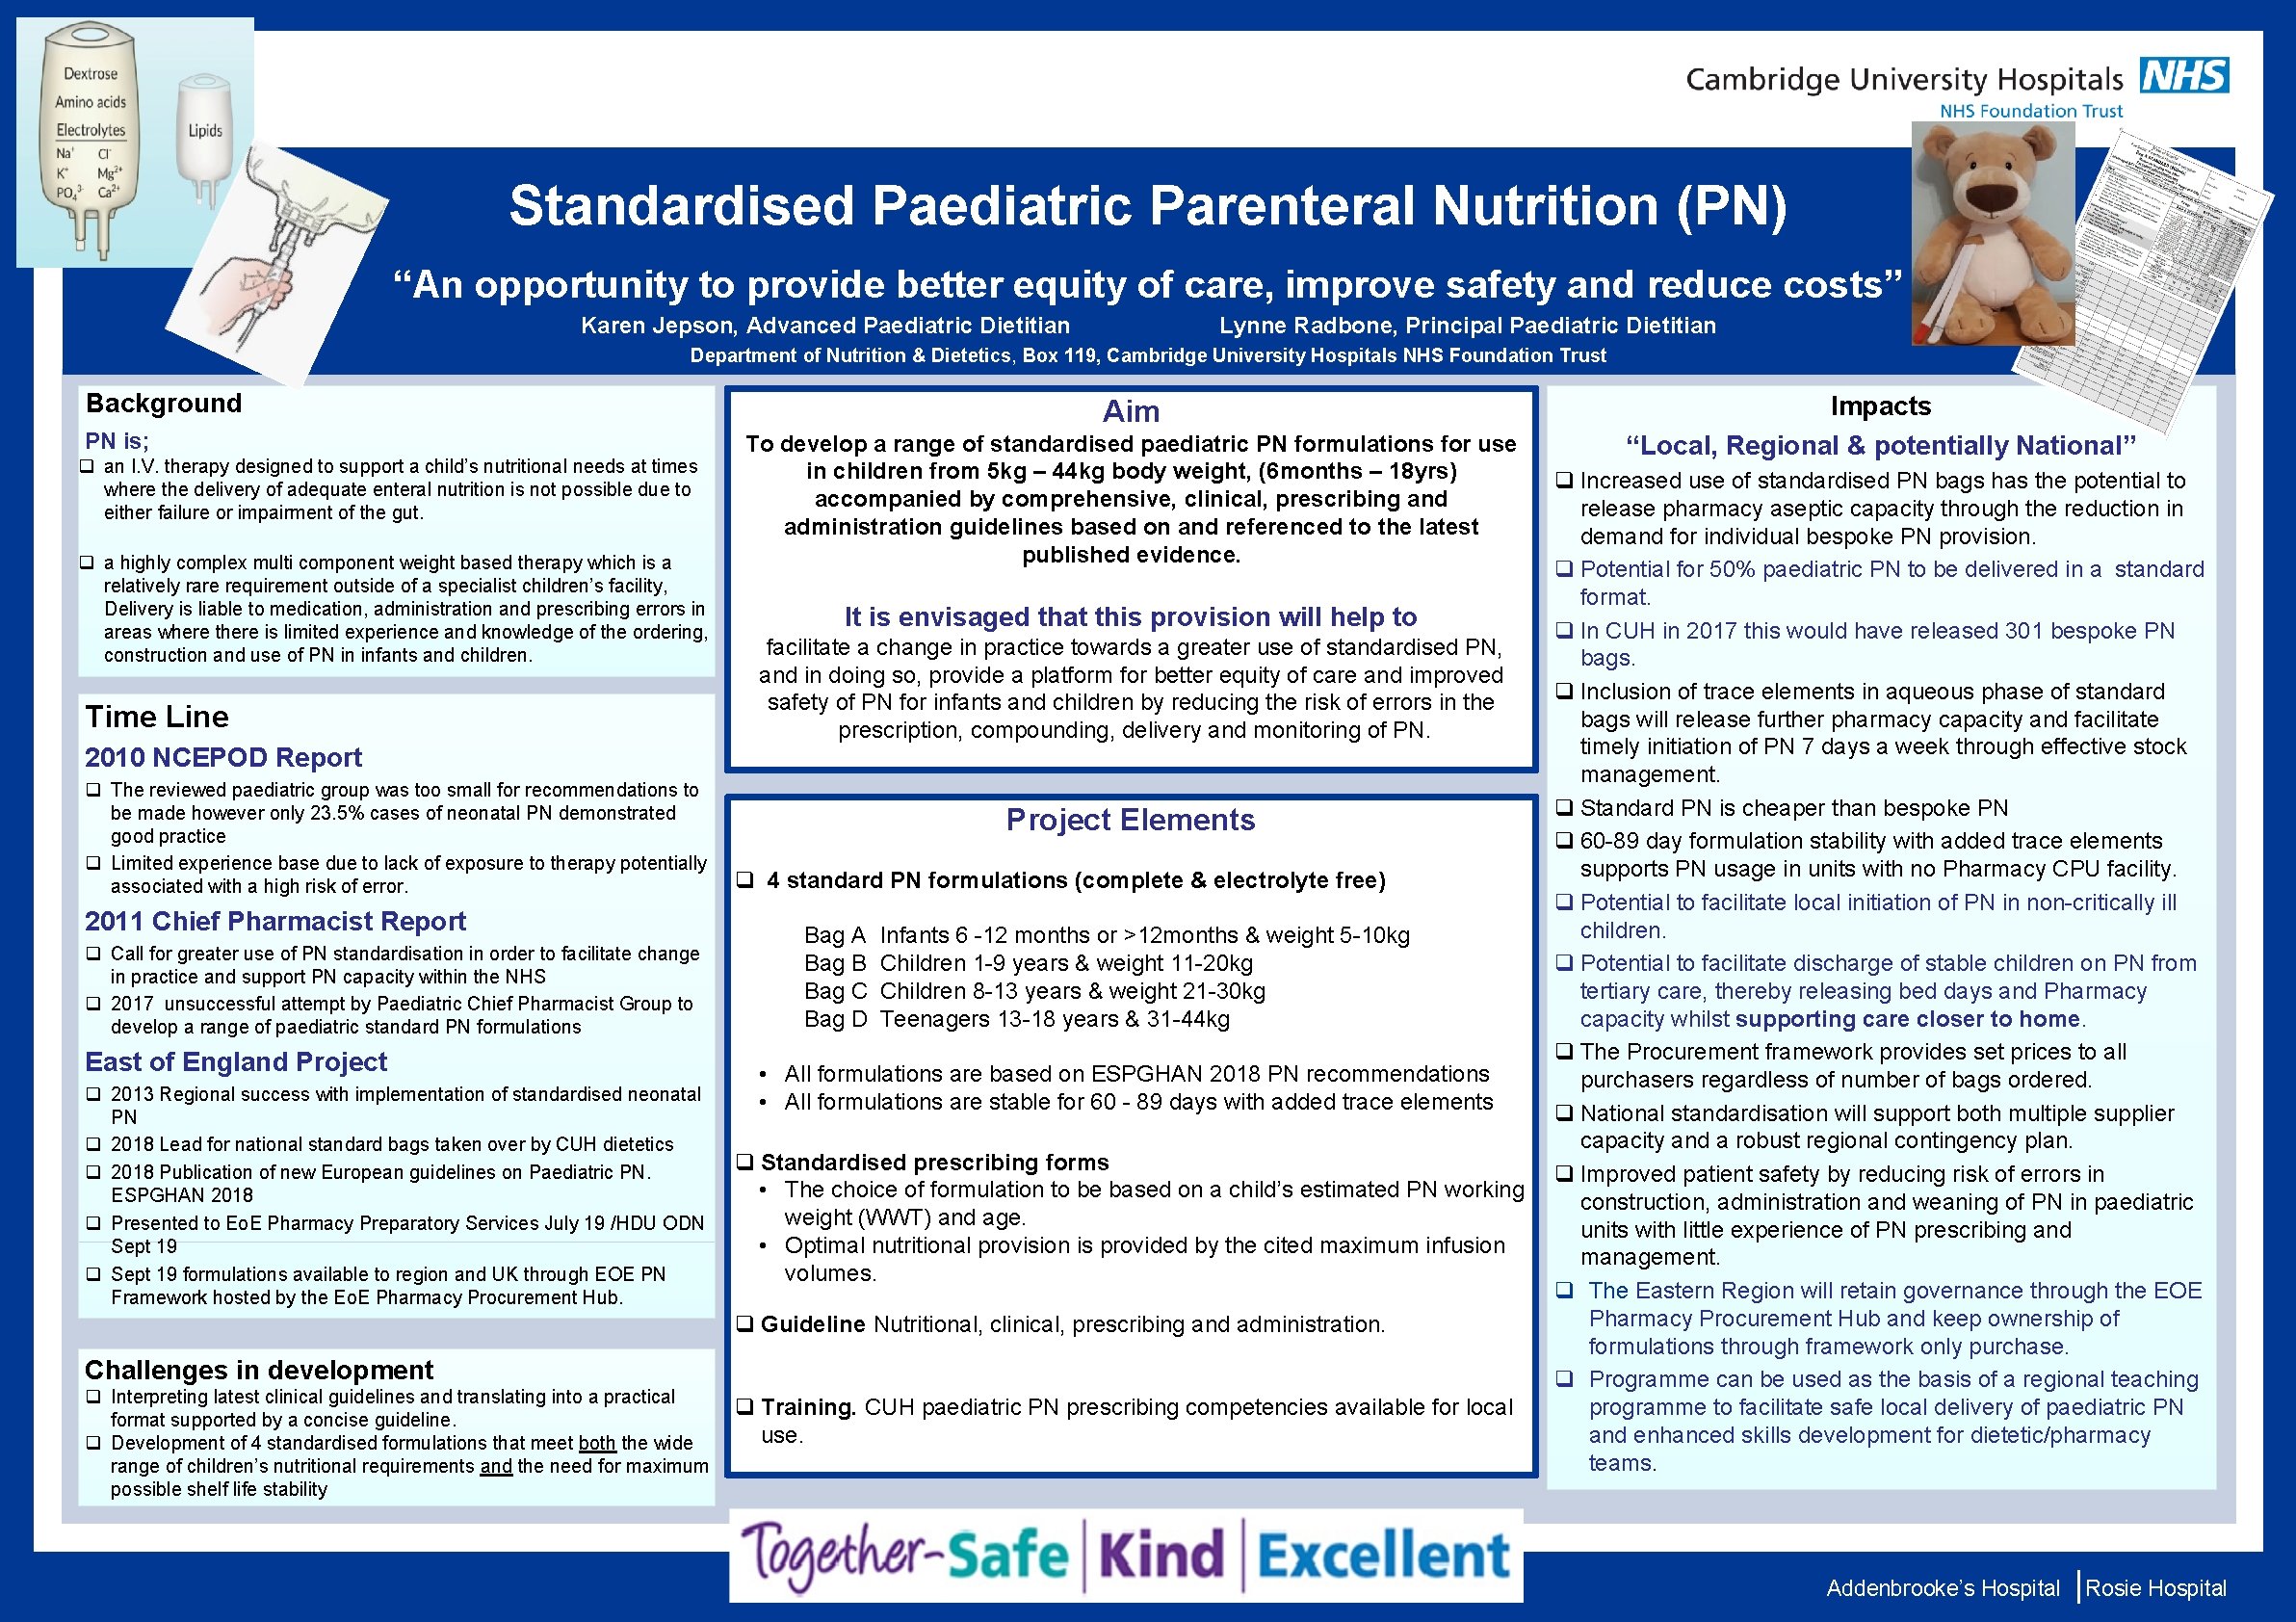 Standardised Paediatric Parenteral Nutrition (PN) “An opportunity to provide better equity of care, improve